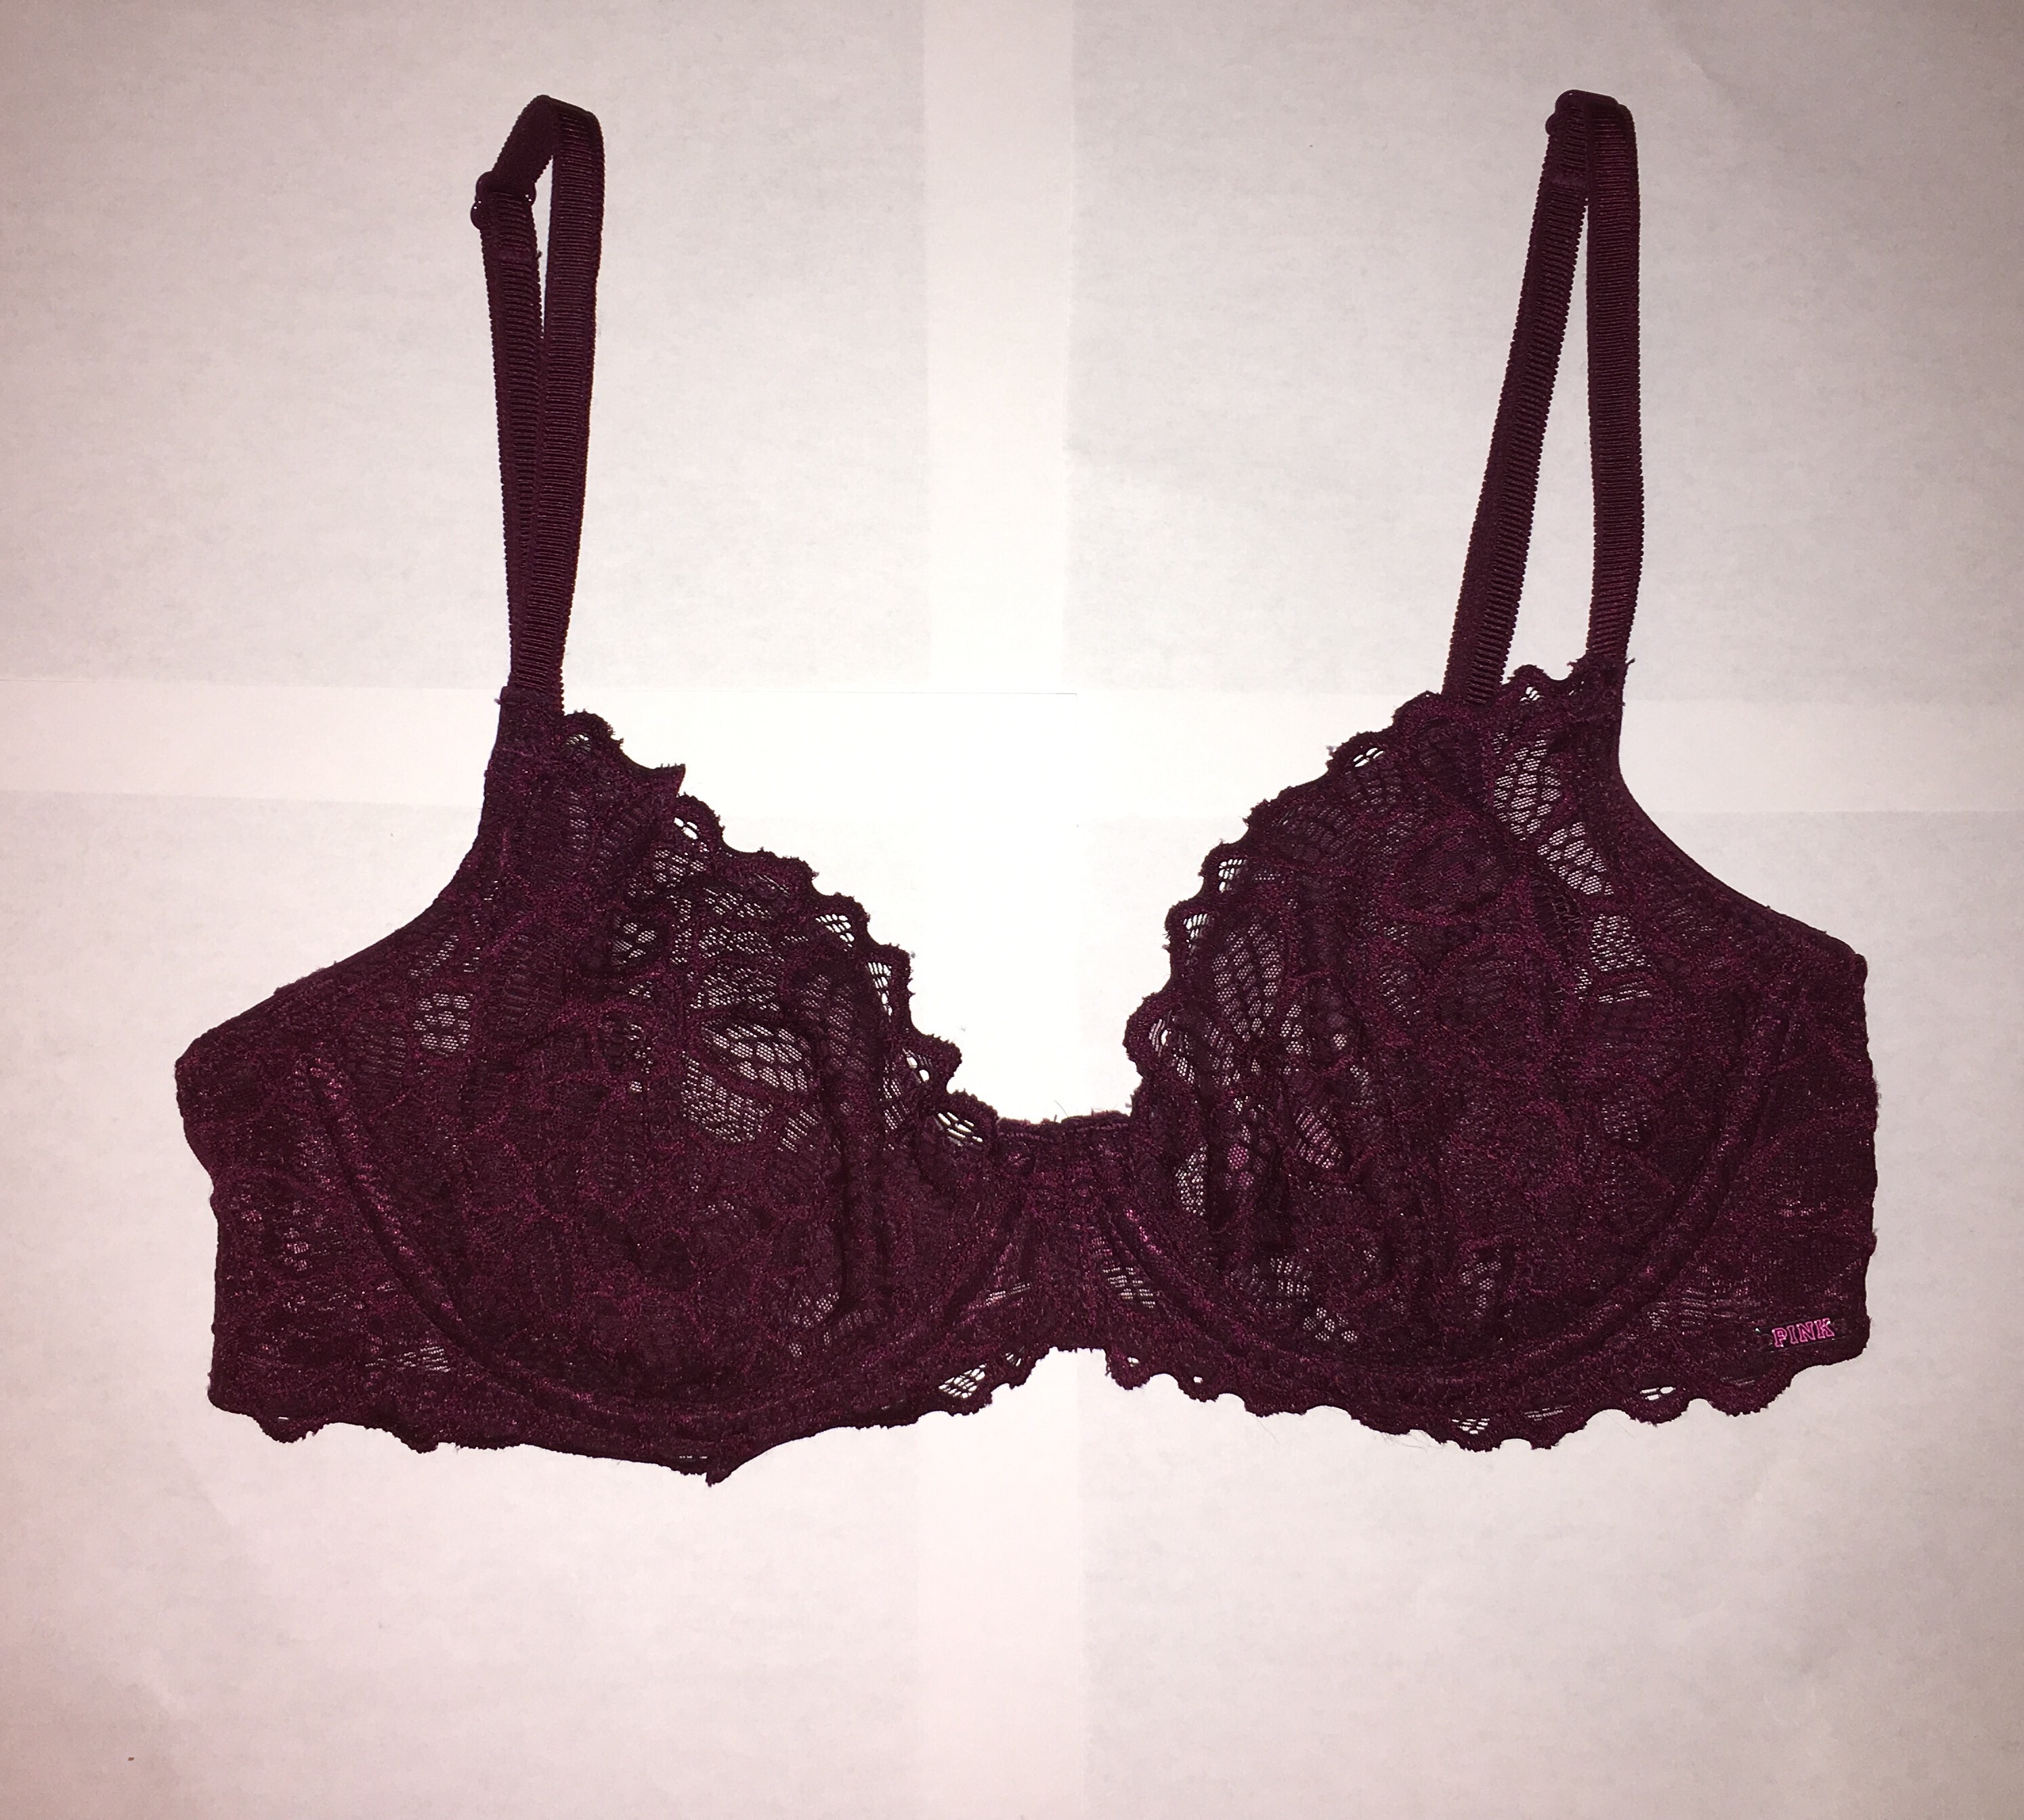 Buy Victoria's Secret Almost Nude Lace Bralette Angelight Bra from the Next  UK online shop